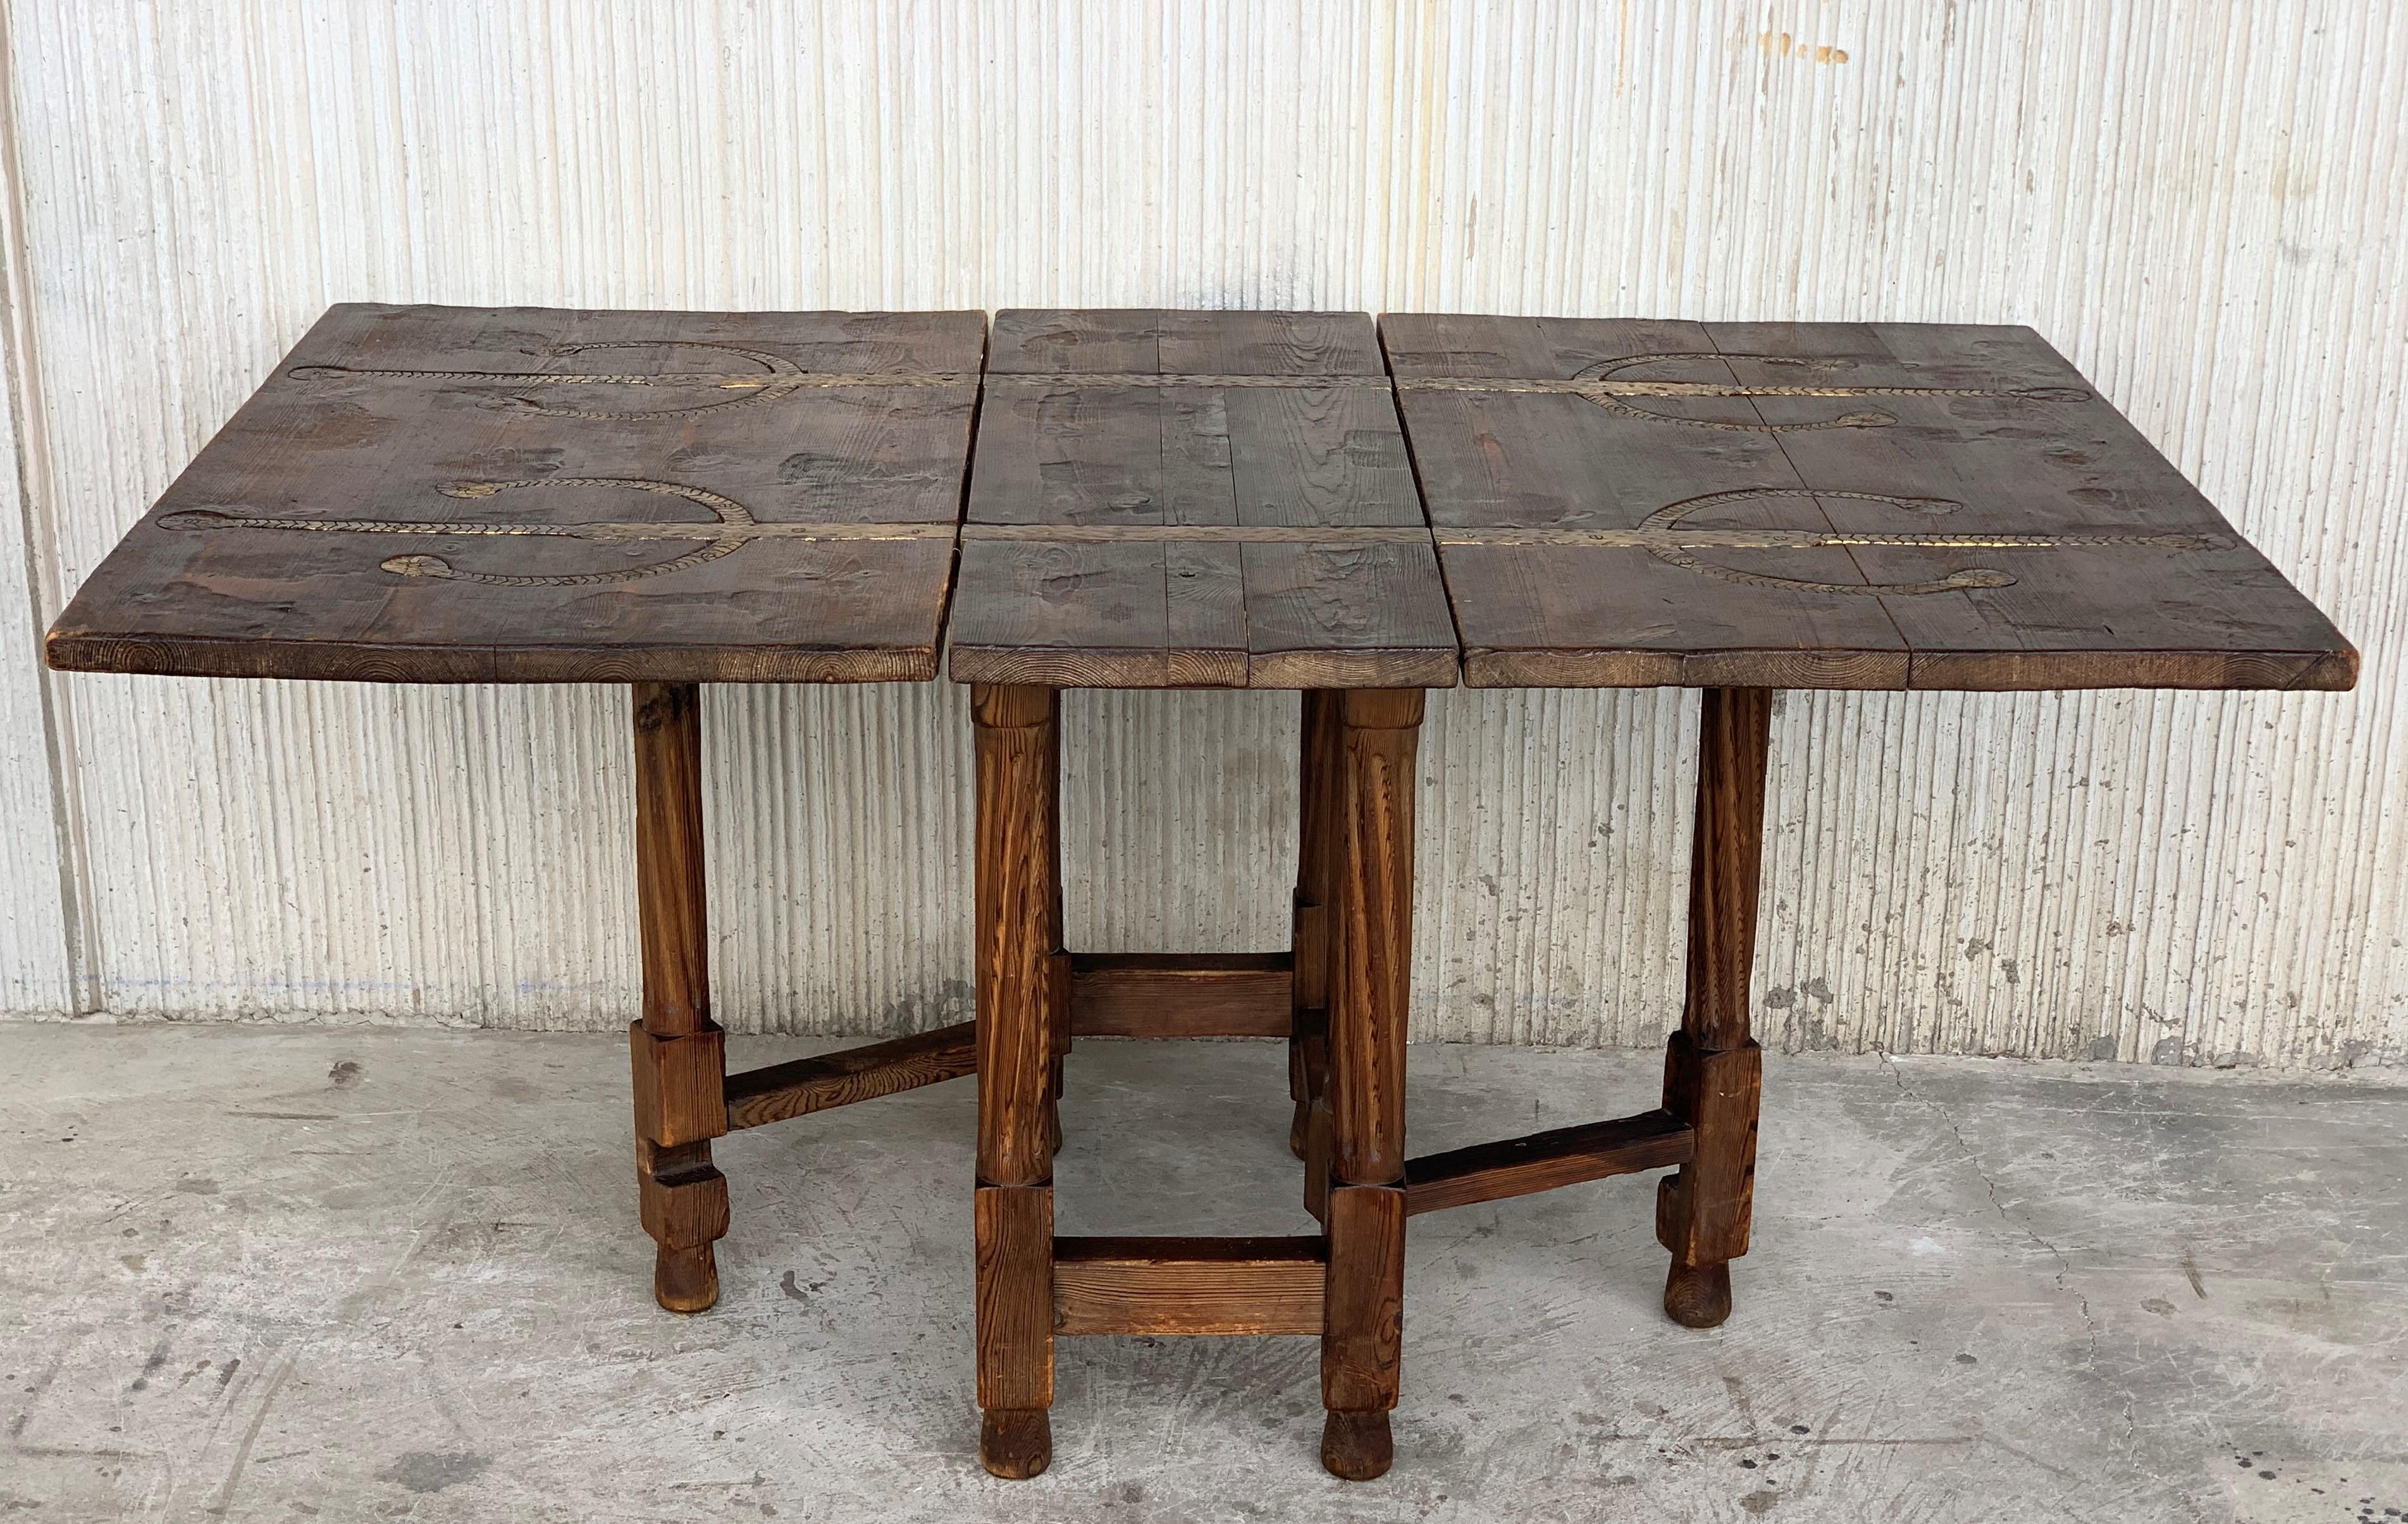 18th century English gateleg table with two leafs with embedded irons
This is a rare Spanish oak and elm gateleg breakfast table. The table appears to be all original, retaining it's original forged iron hinges and old surface. The table is newly